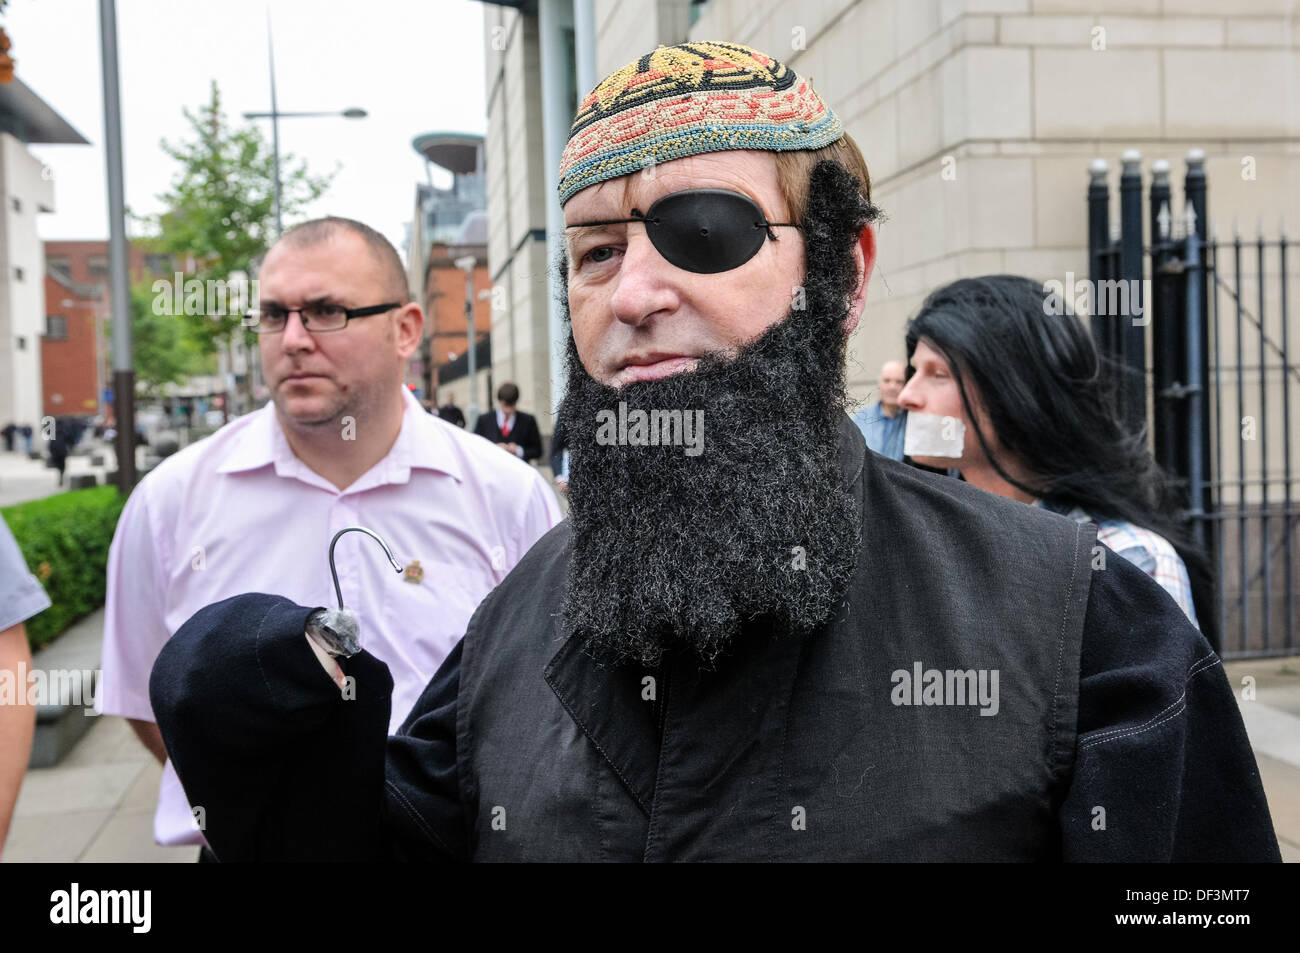 Belfast, Northern Ireland, 27th September 2013 - Protestant Coalition founder member Willie Frazer appears in court dressed as Abu Hamza. He is protesting that he is being charged under legislation aimed at curbing 'infamous Muslim hate preachers'. Credit:  Stephen Barnes/Alamy Live News Stock Photo